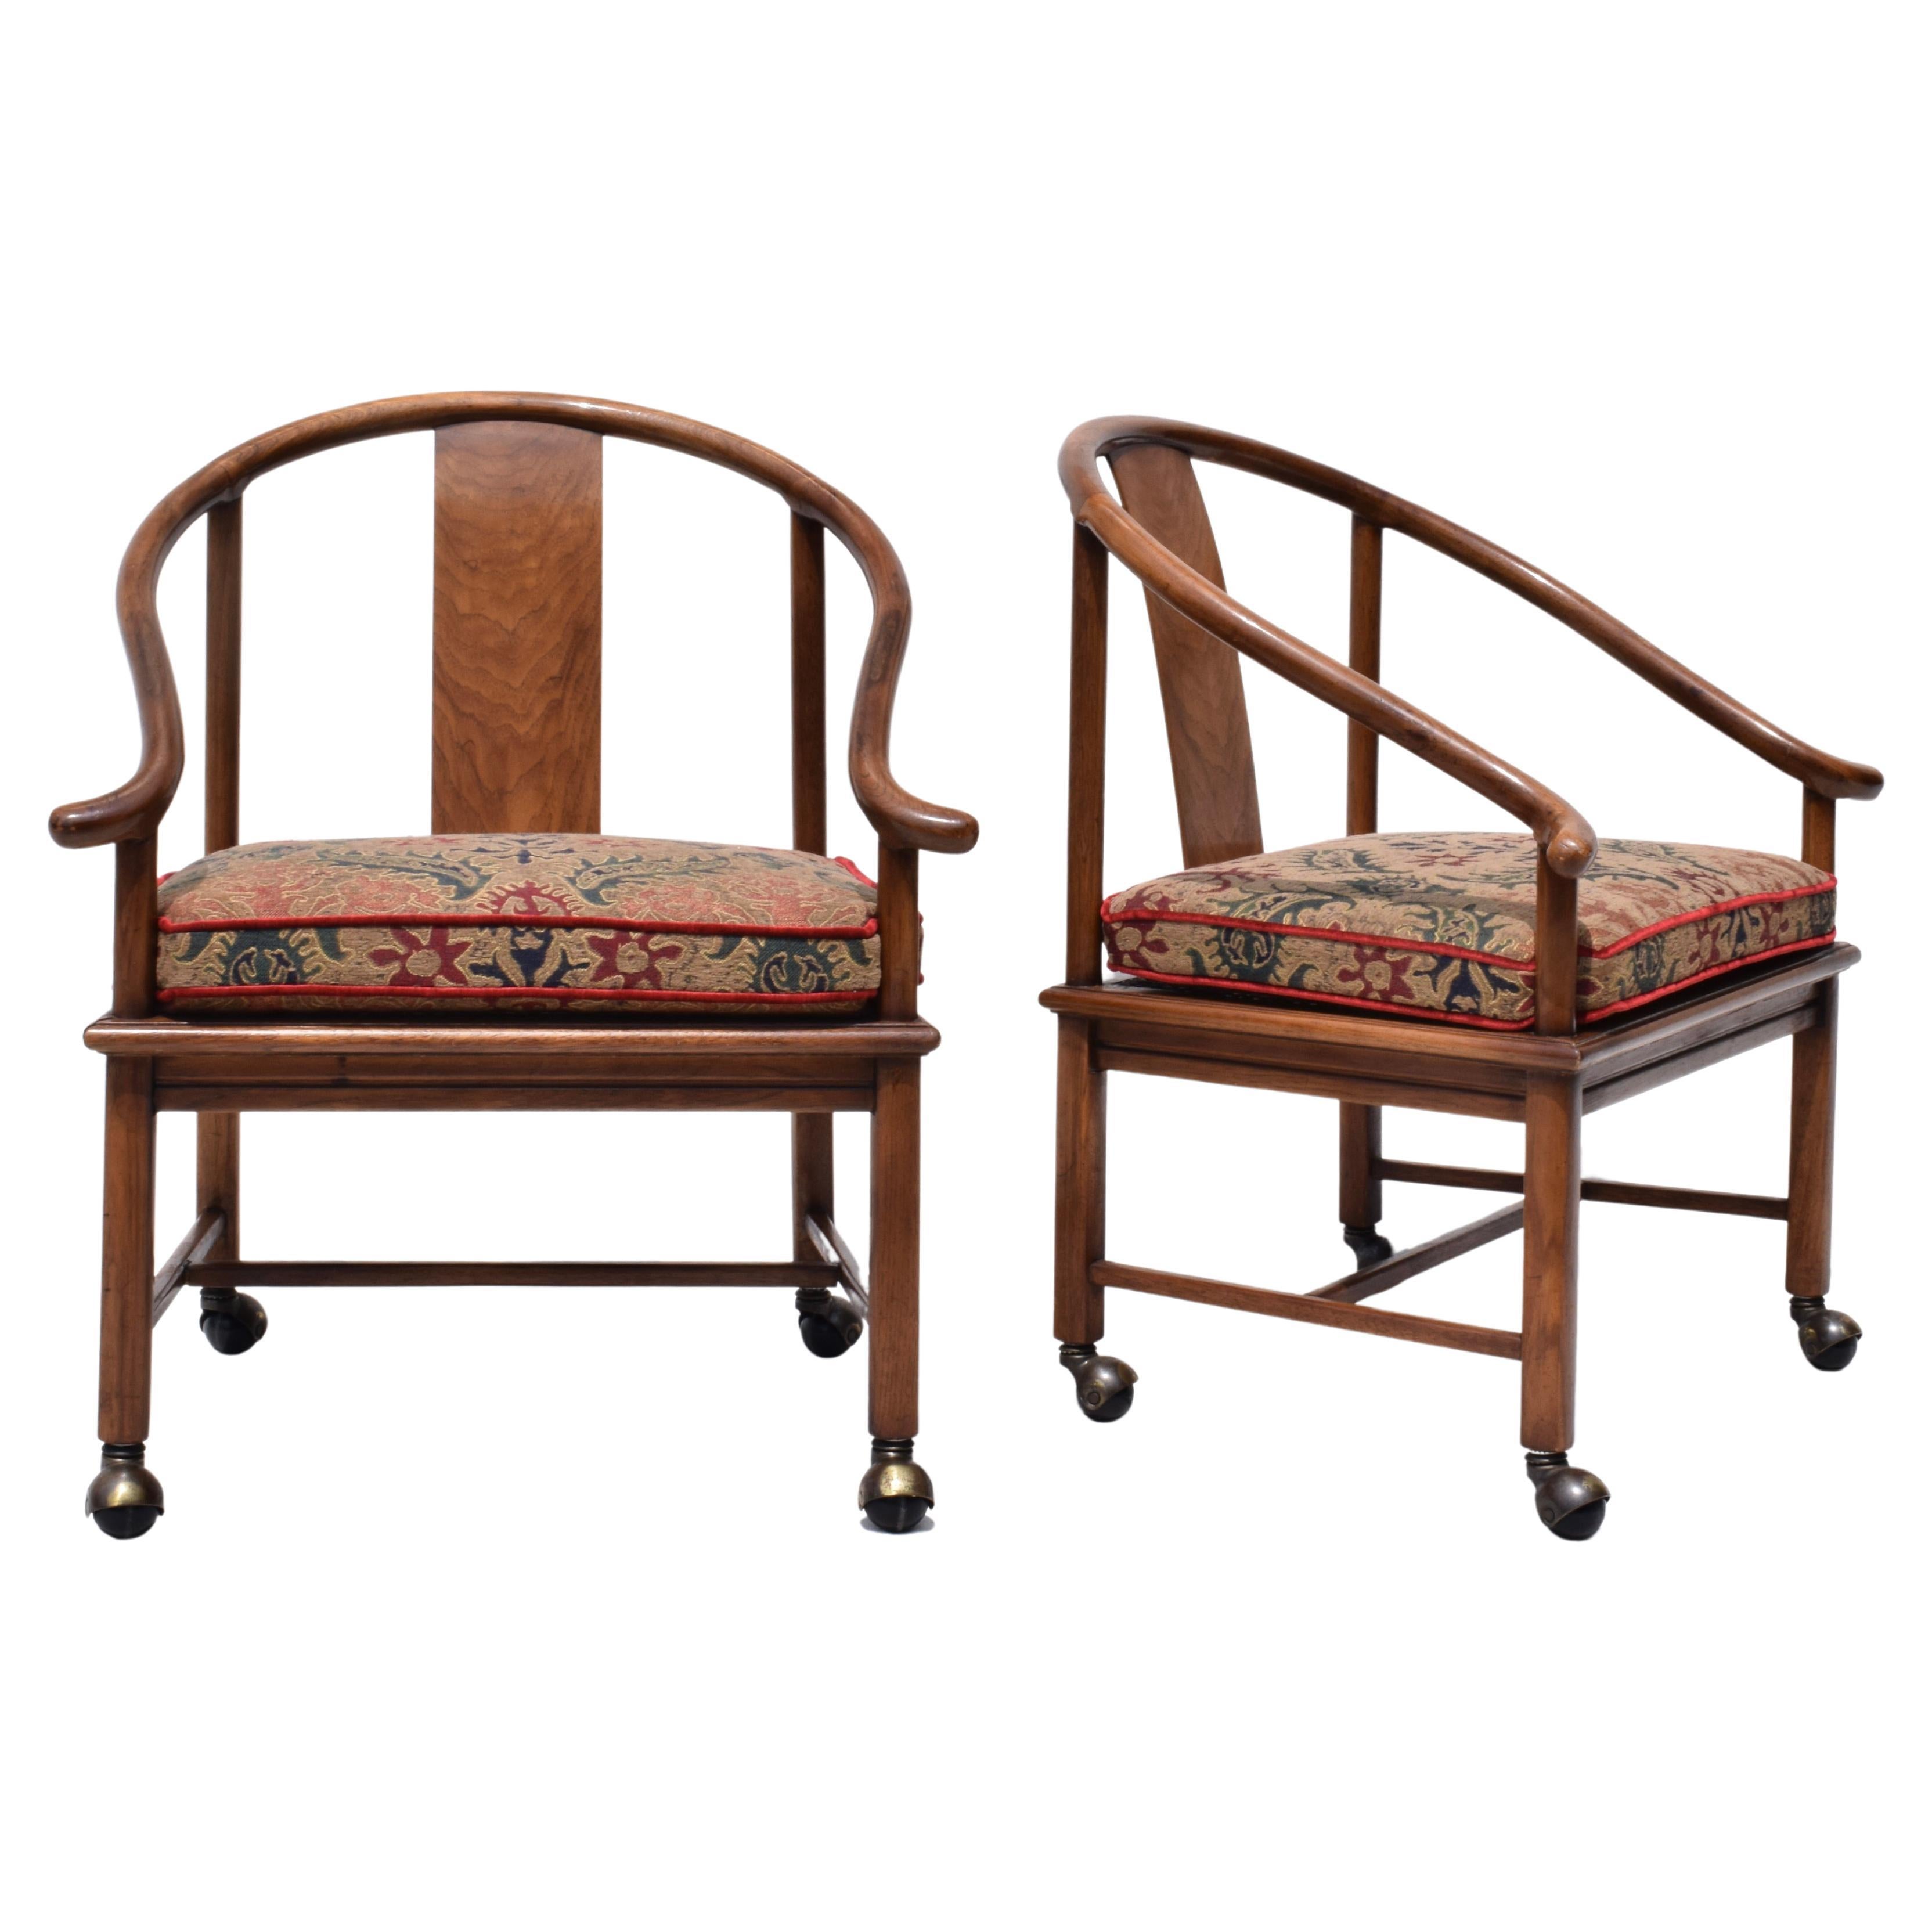 20th c. Modern Ming Horseshoe Chairs With Caned Seats Custom Cushions 